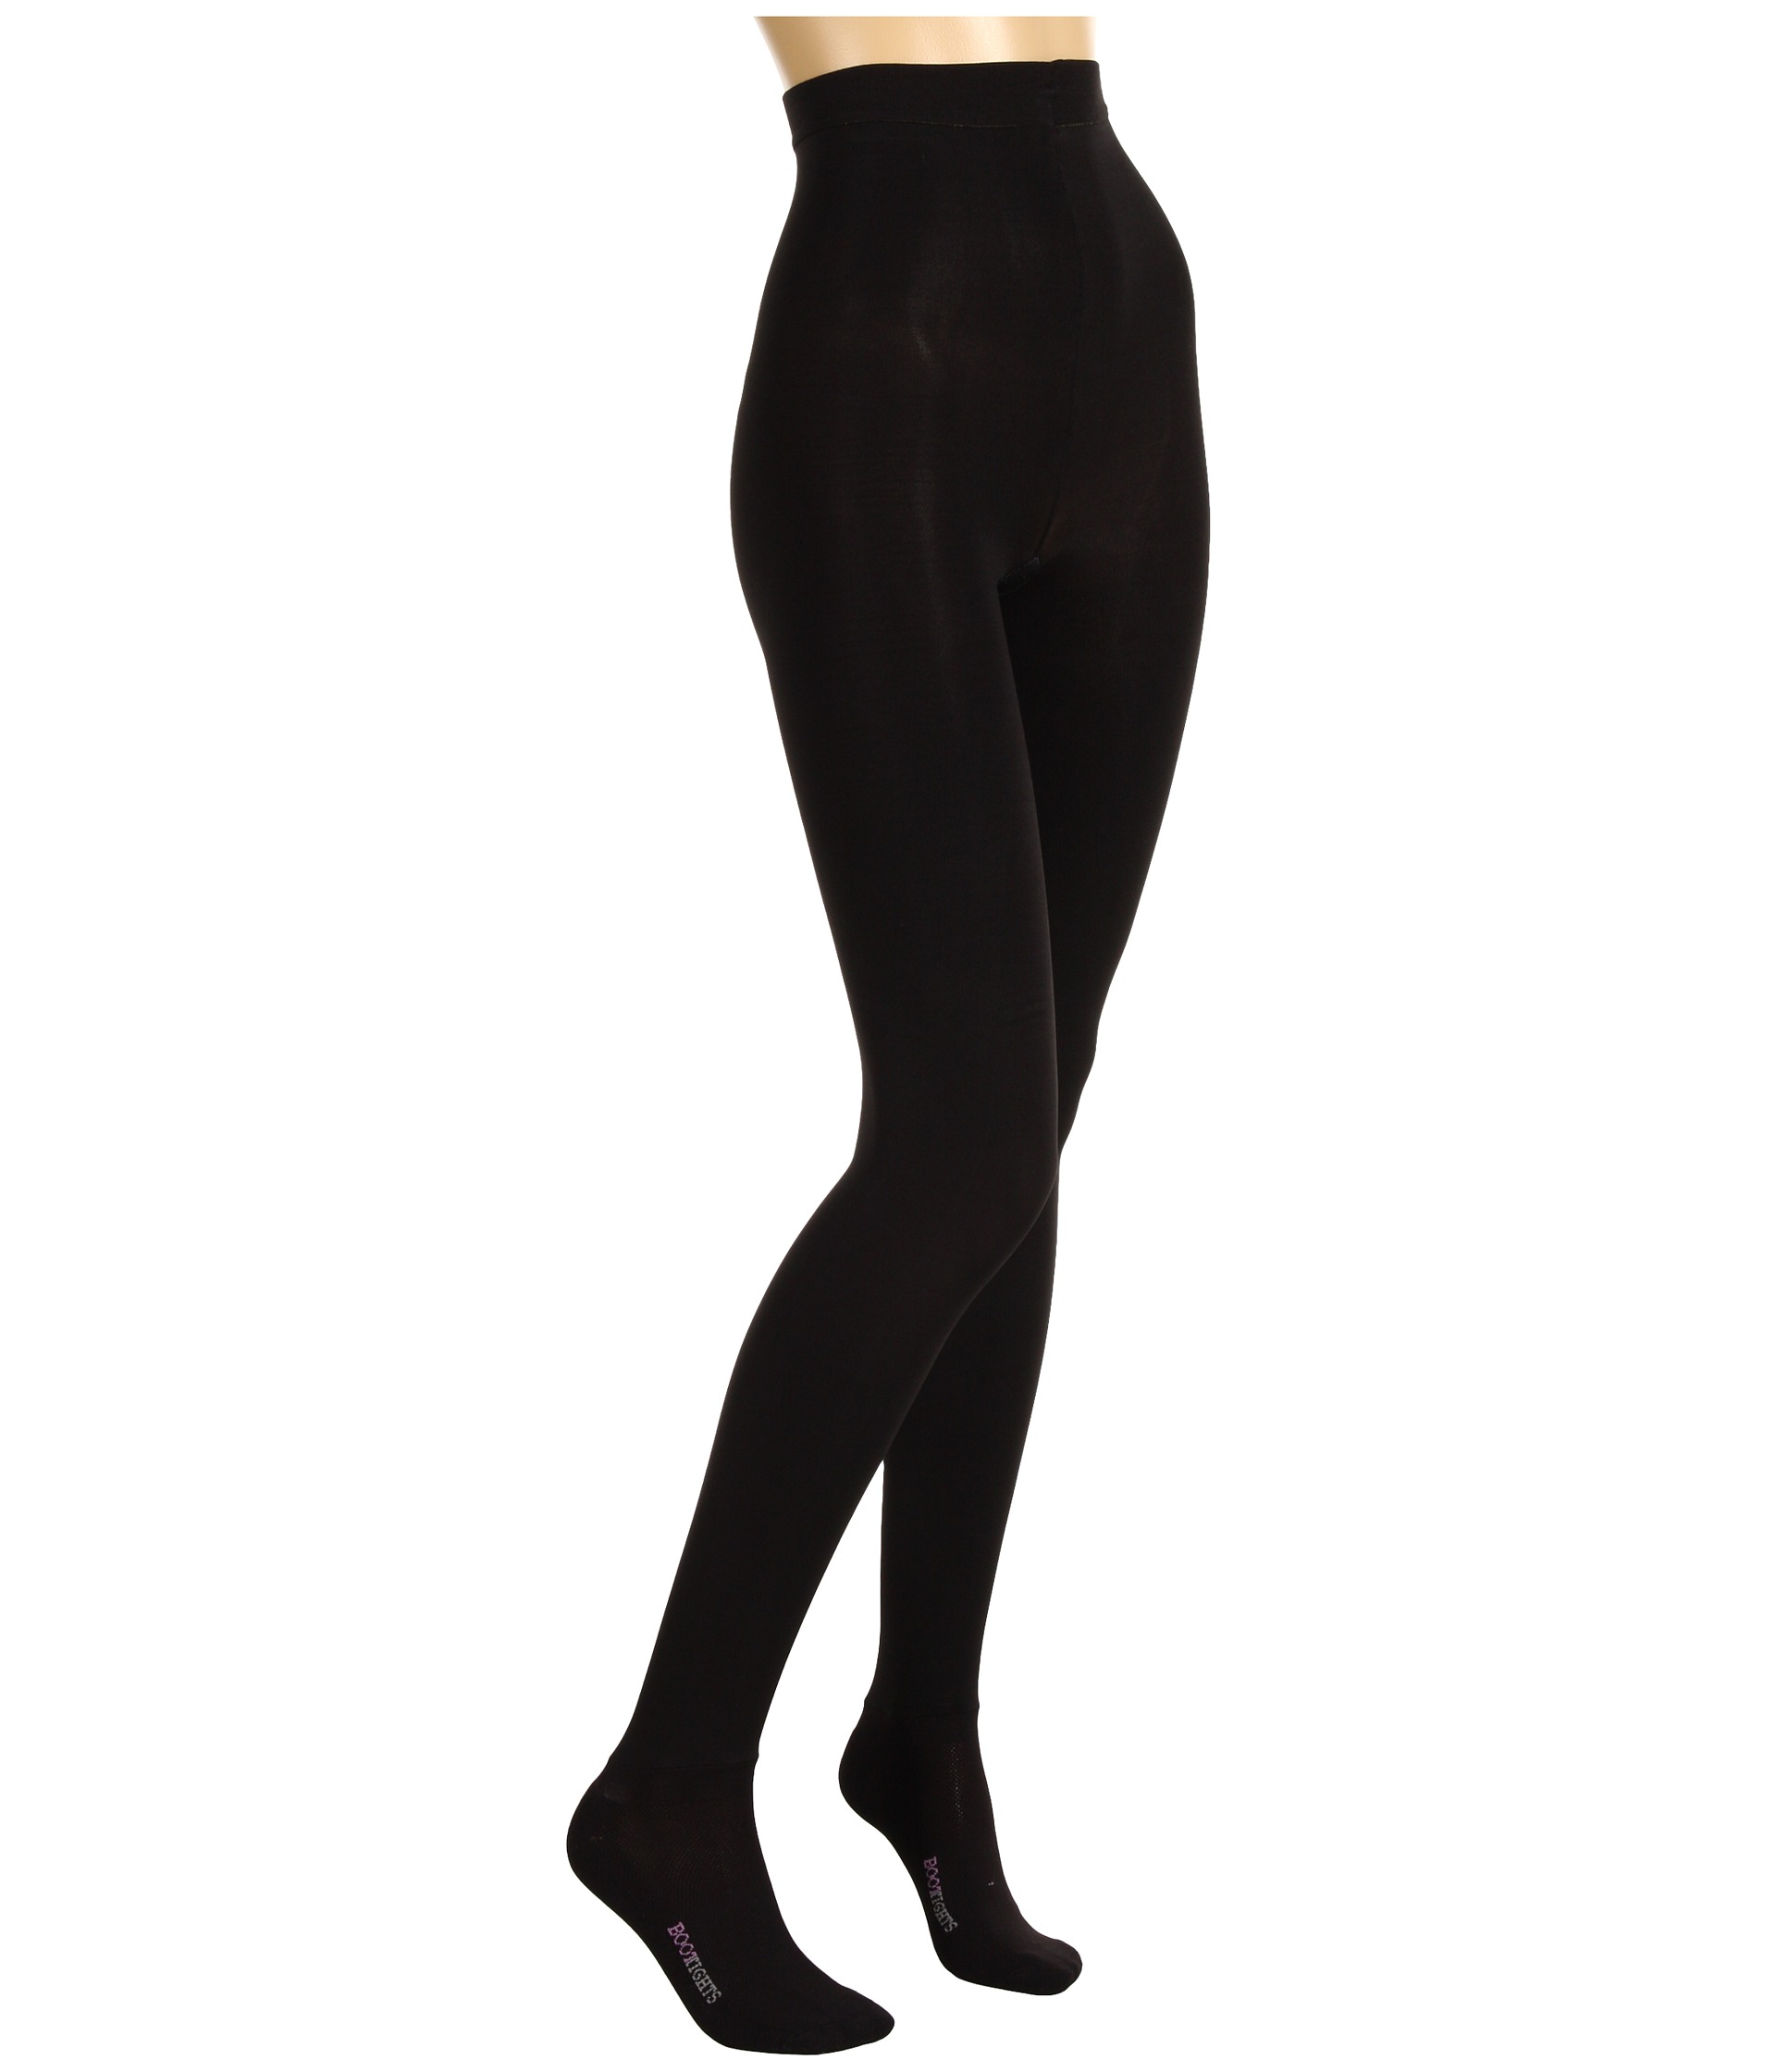 BOOTIGHTS Opaque Full-Body Shaper Tight/Ankle Sock - Zappos.com Free ...